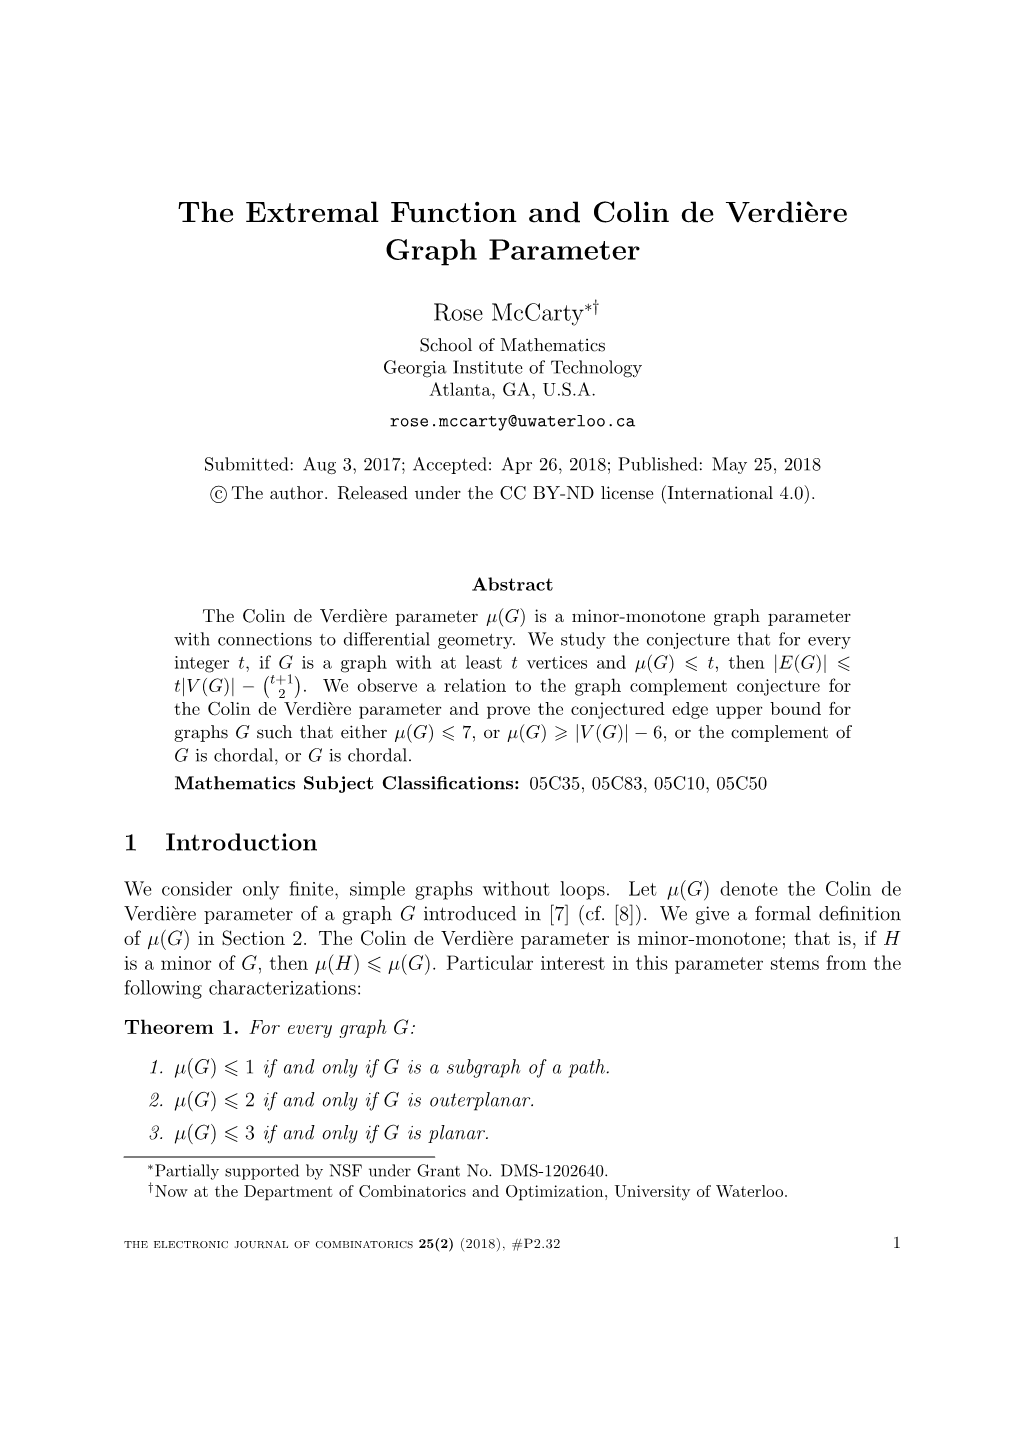 The Extremal Function and Colin De Verdi`Ere Graph Parameter